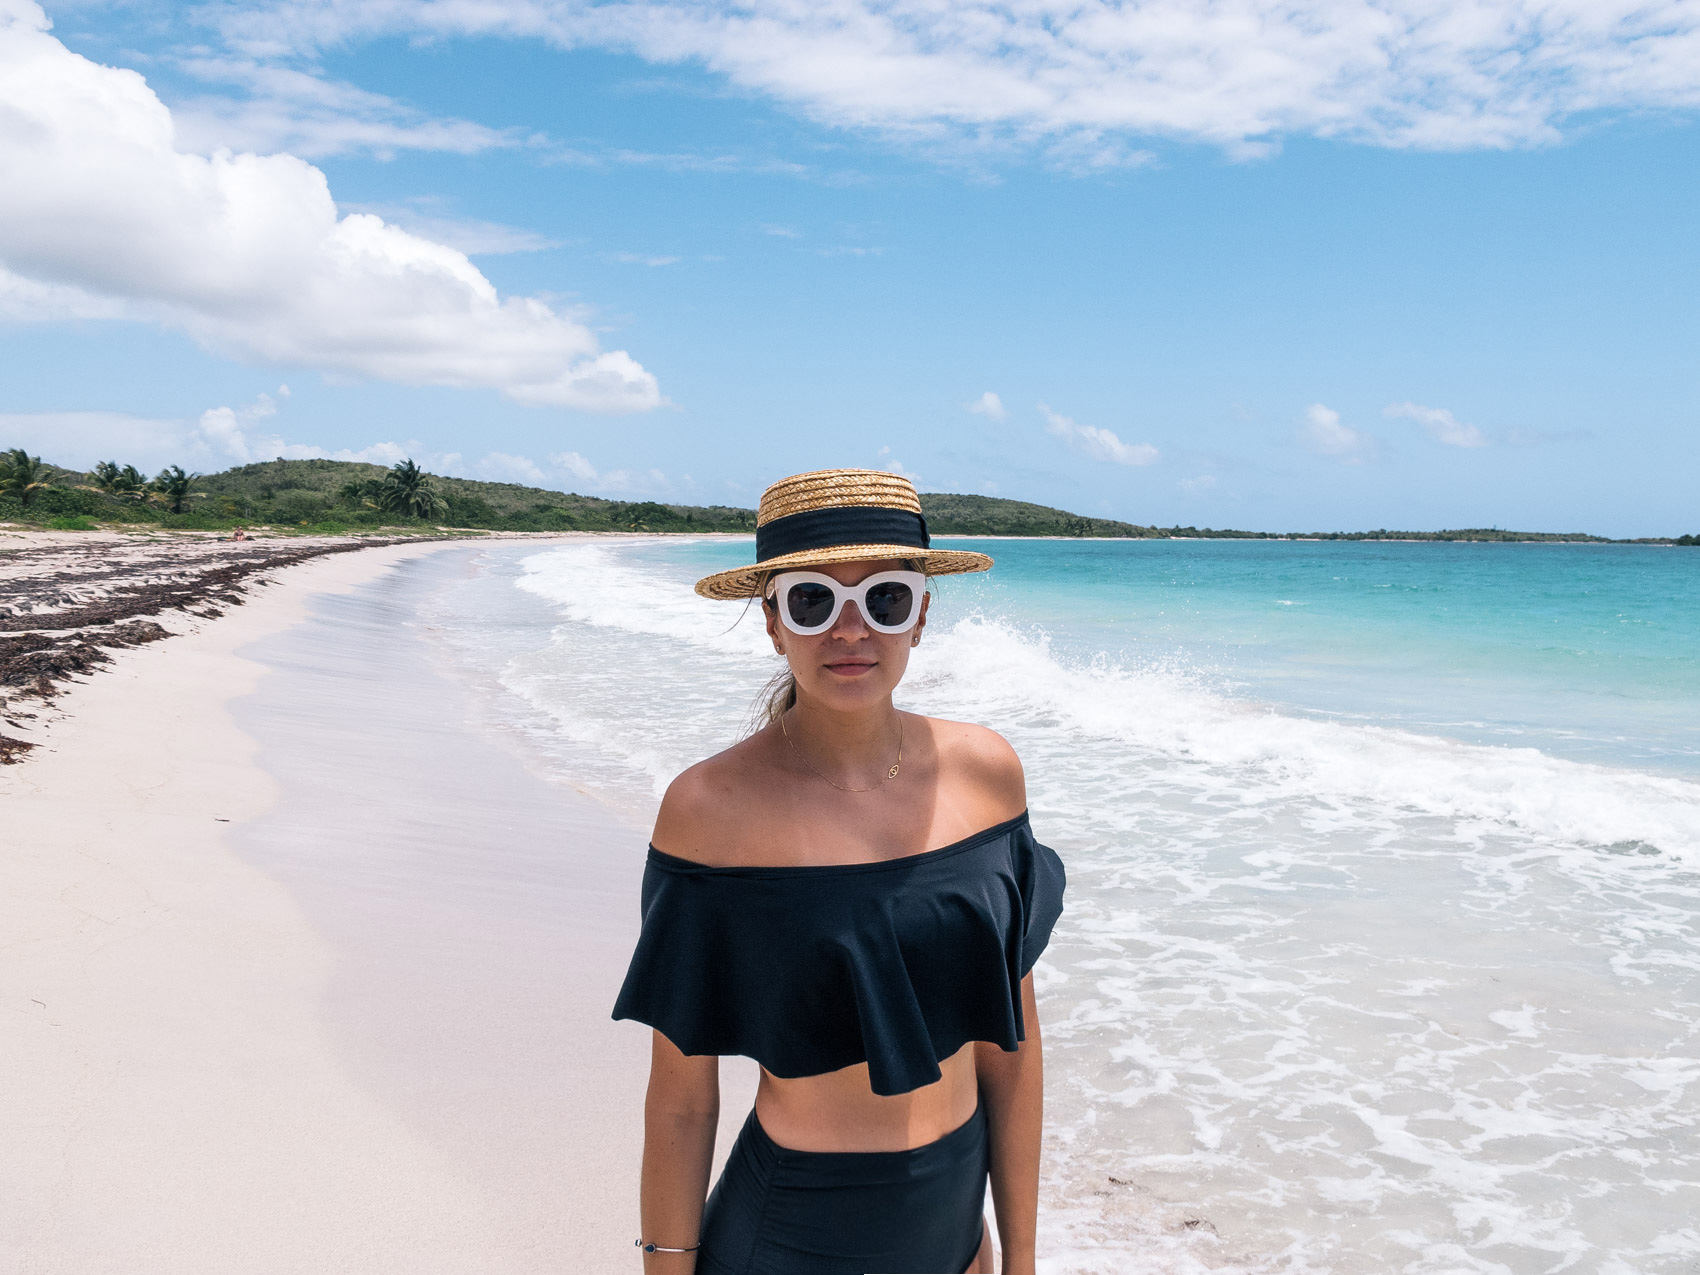 Vacation outfit idea, beach style OOTD by Maristella wearing a Zara straw hat, off shoulder black bikini top with high waisted bottoms and Celine oversize white sunglasses